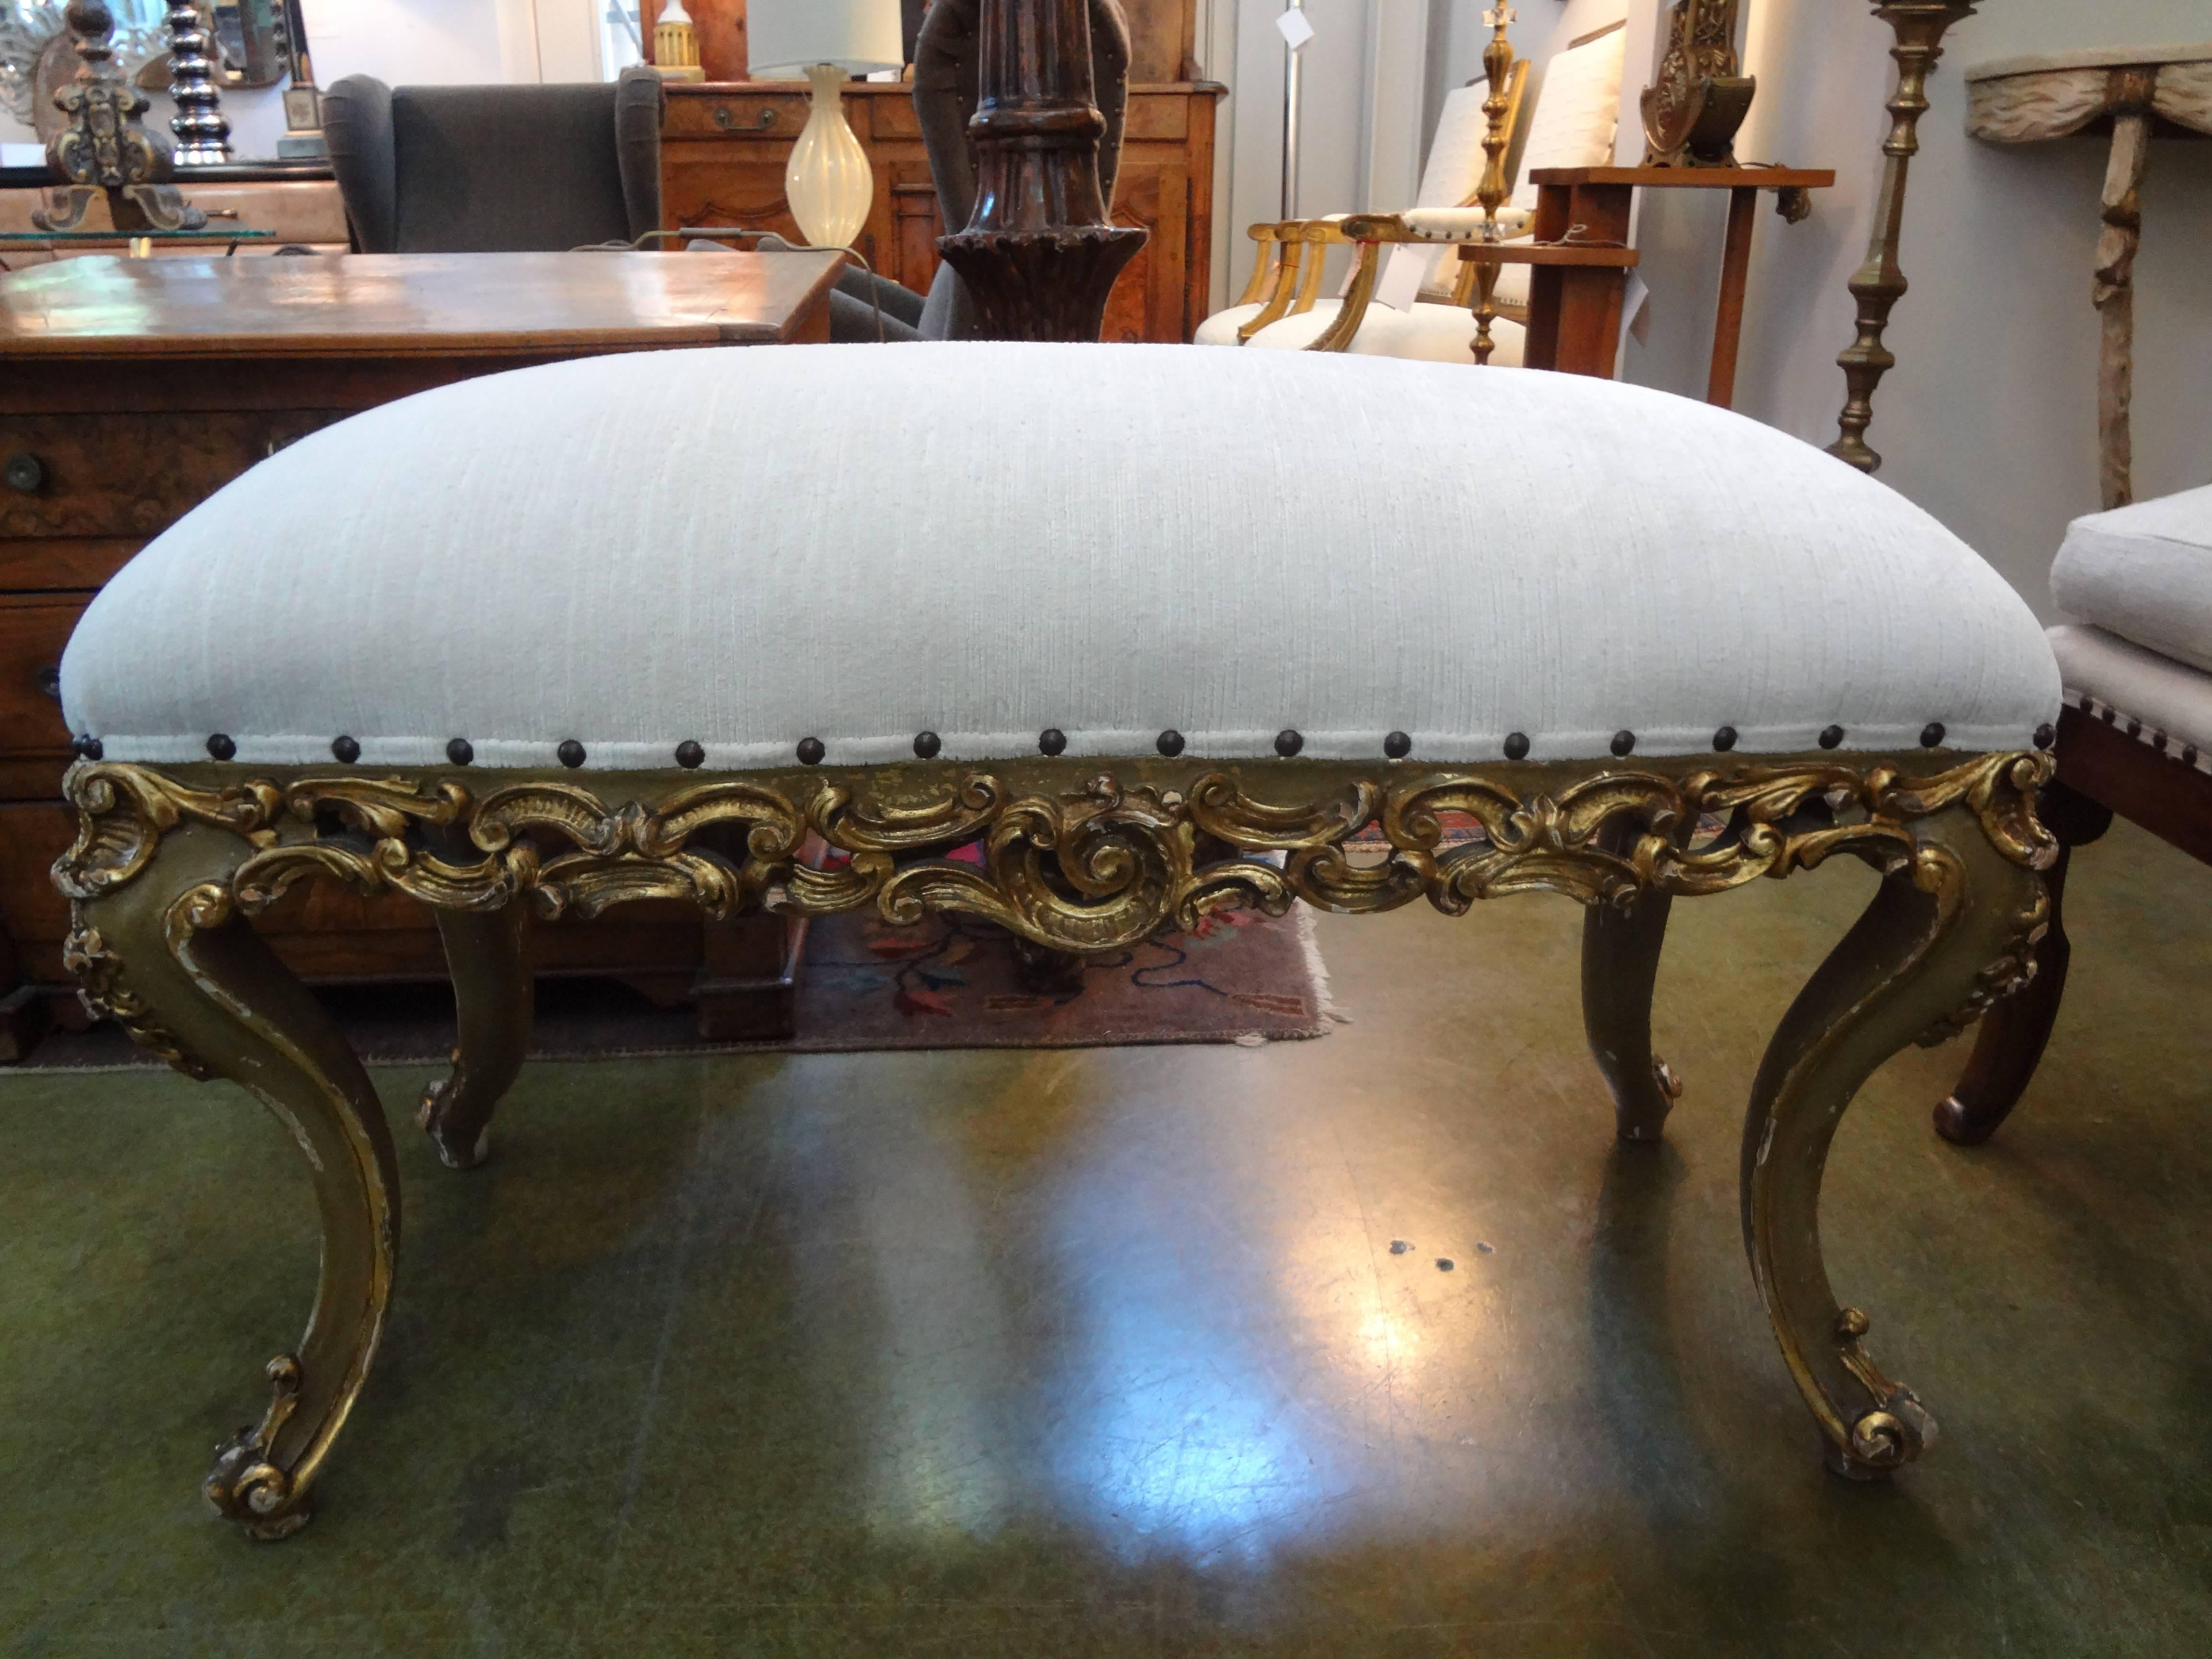 Italian giltwood bench with exaggerated legs.
Stunning Italian gilt wood bench with exaggerated legs. This 1920s Italian bench was taken down to the frame and professionally upholstered in striated velvet with spaced brass nail head detail. This